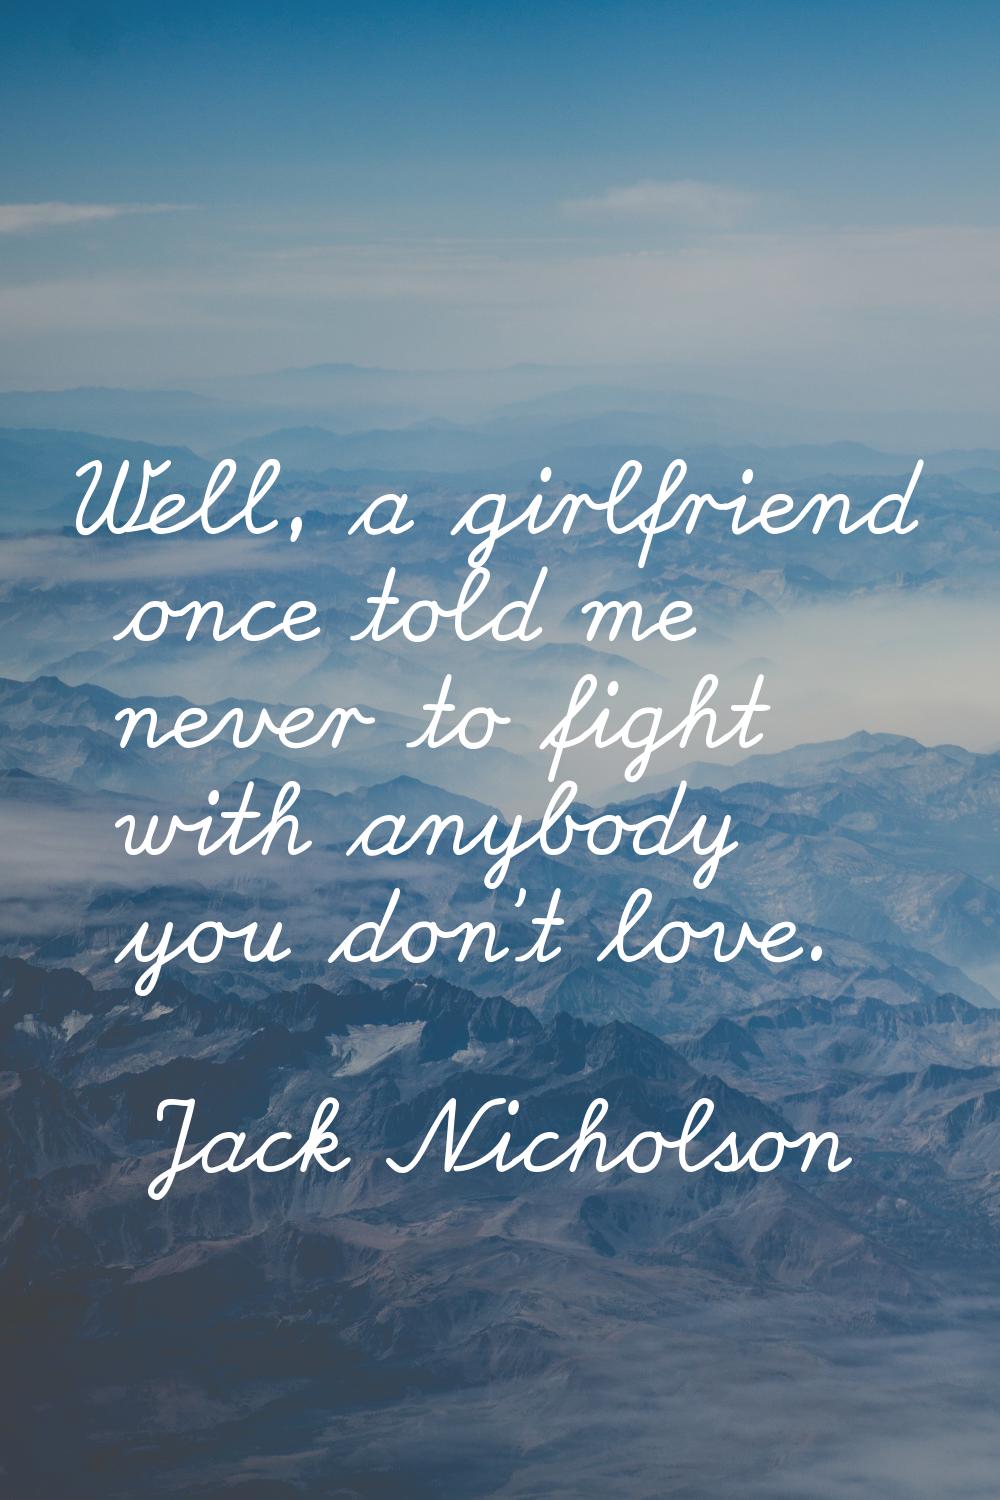 Well, a girlfriend once told me never to fight with anybody you don't love.